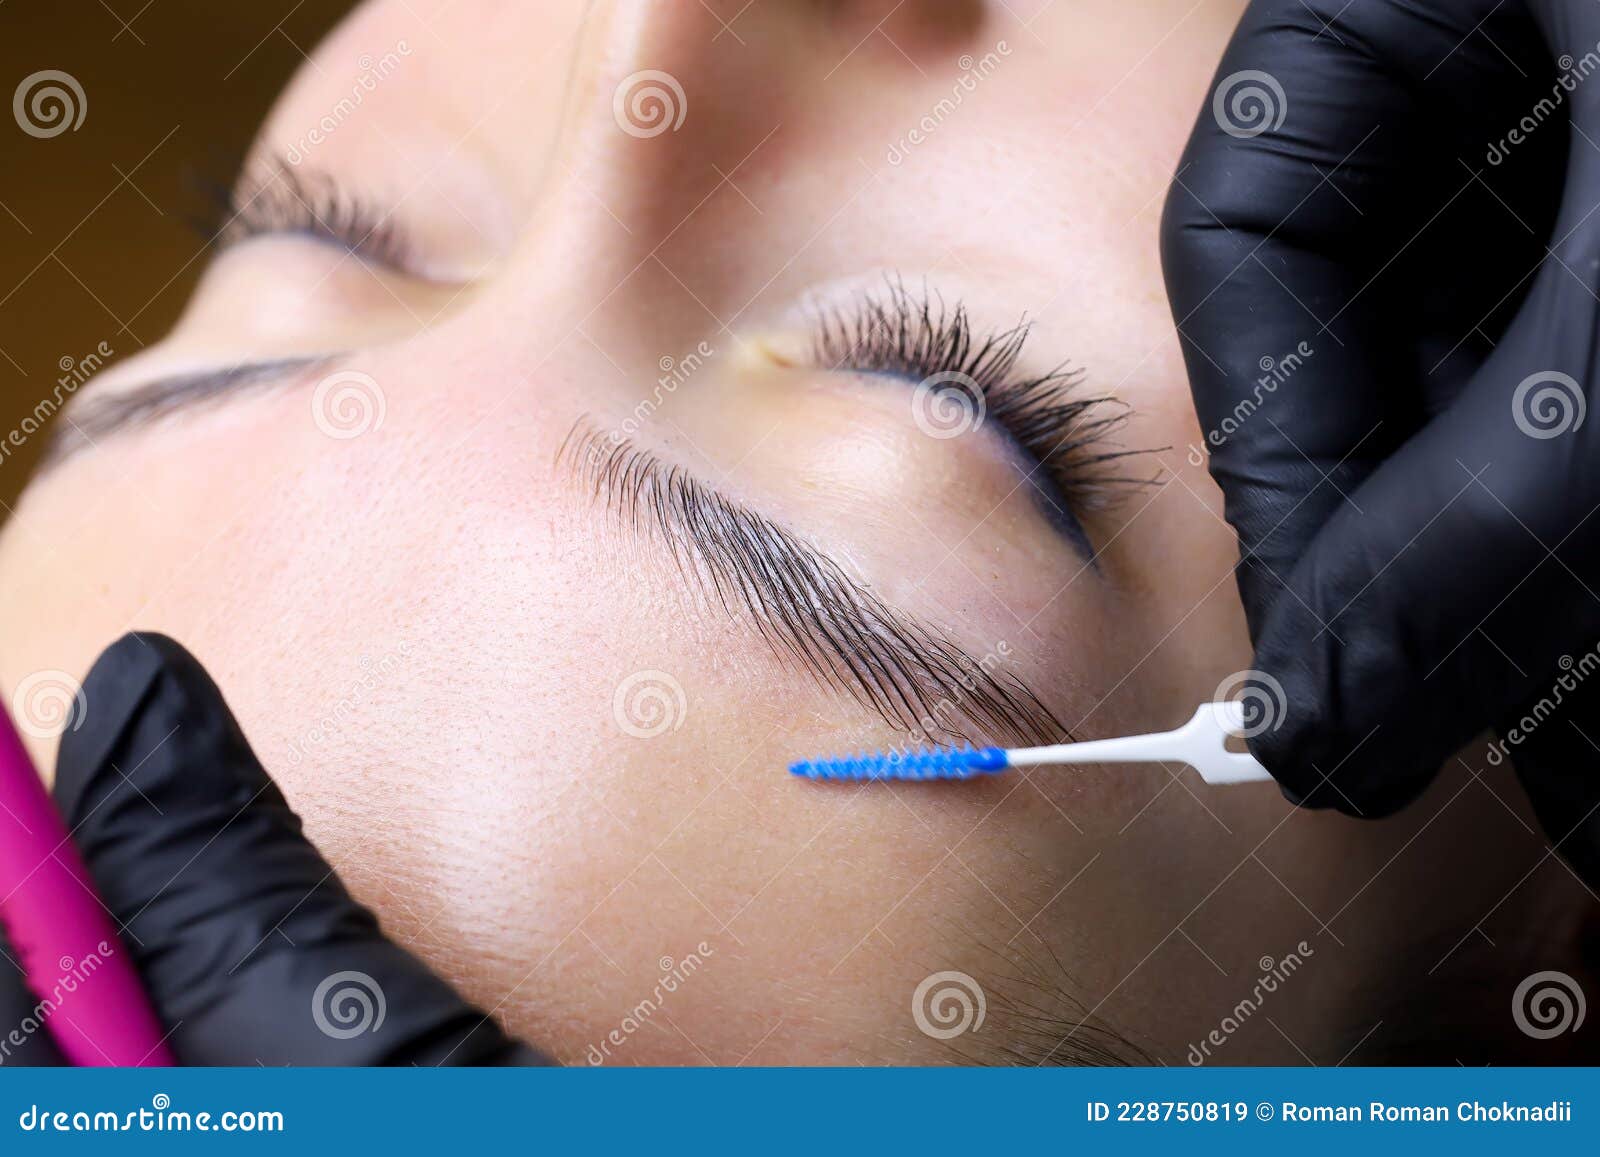 the master`s hands holding the brush the master directs the growth of hairs after lamination of the eyebrows